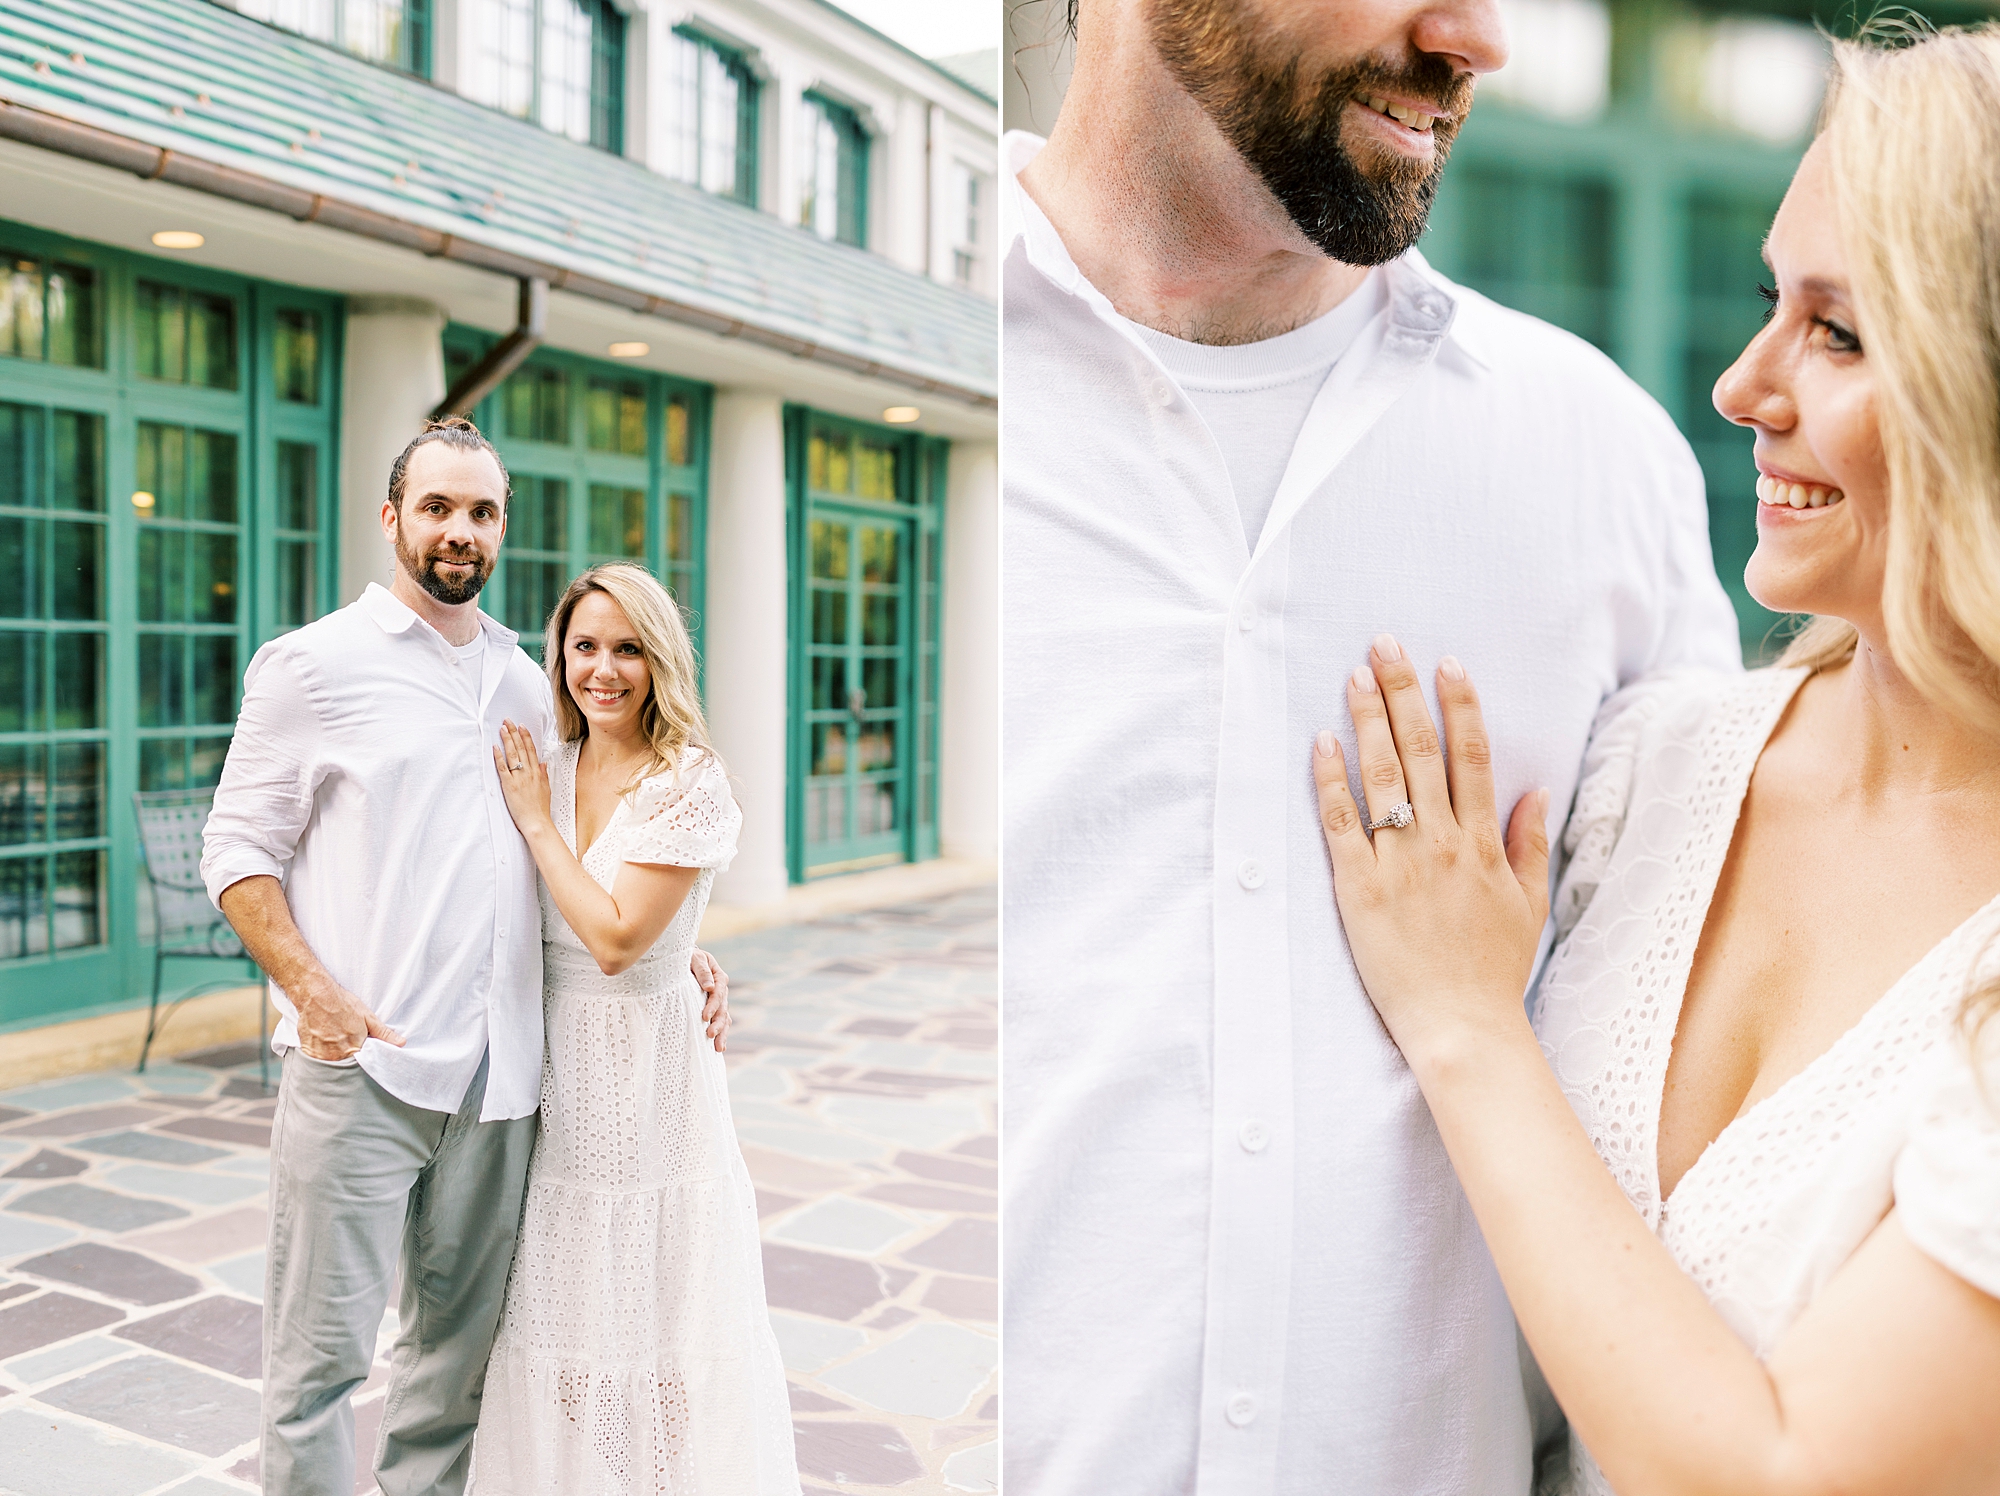 bride puts hand on groom's chest to show off ring